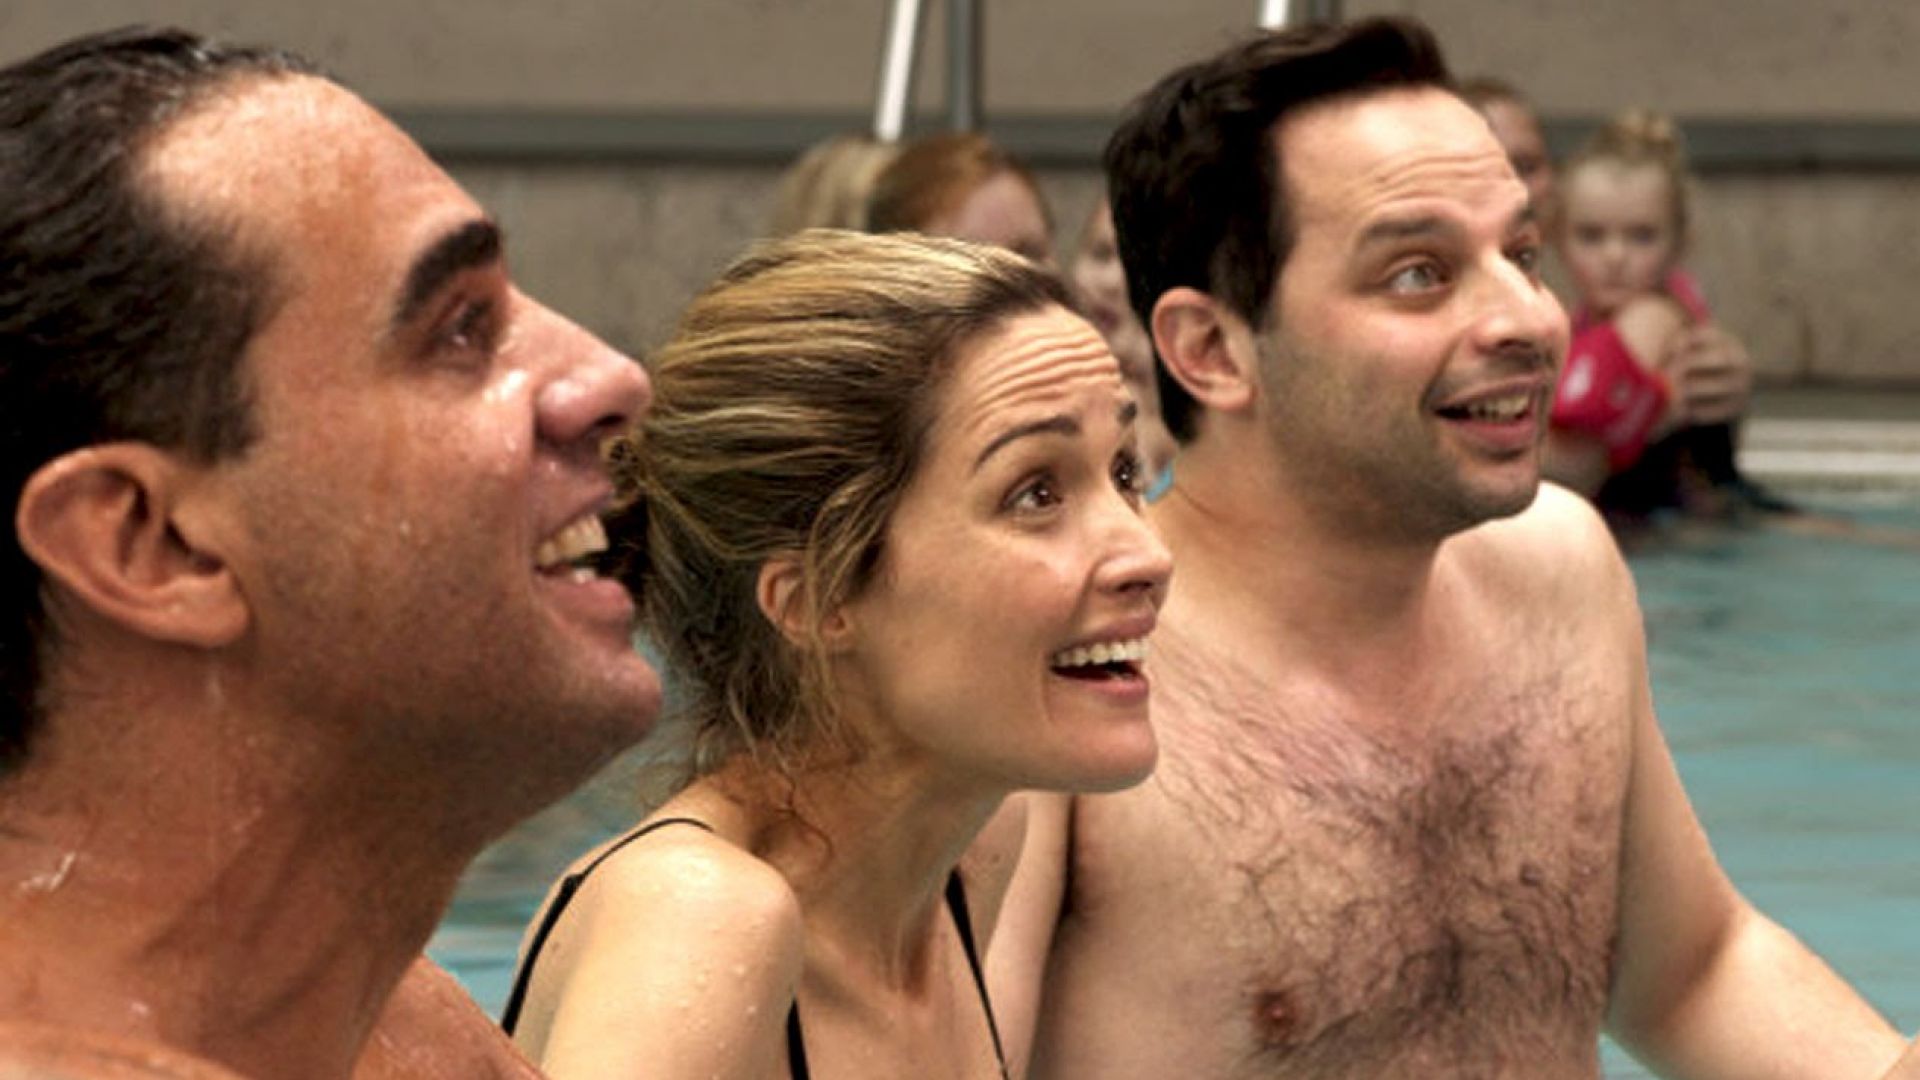 Official Trailer for &#039;Adult Beginners&#039;